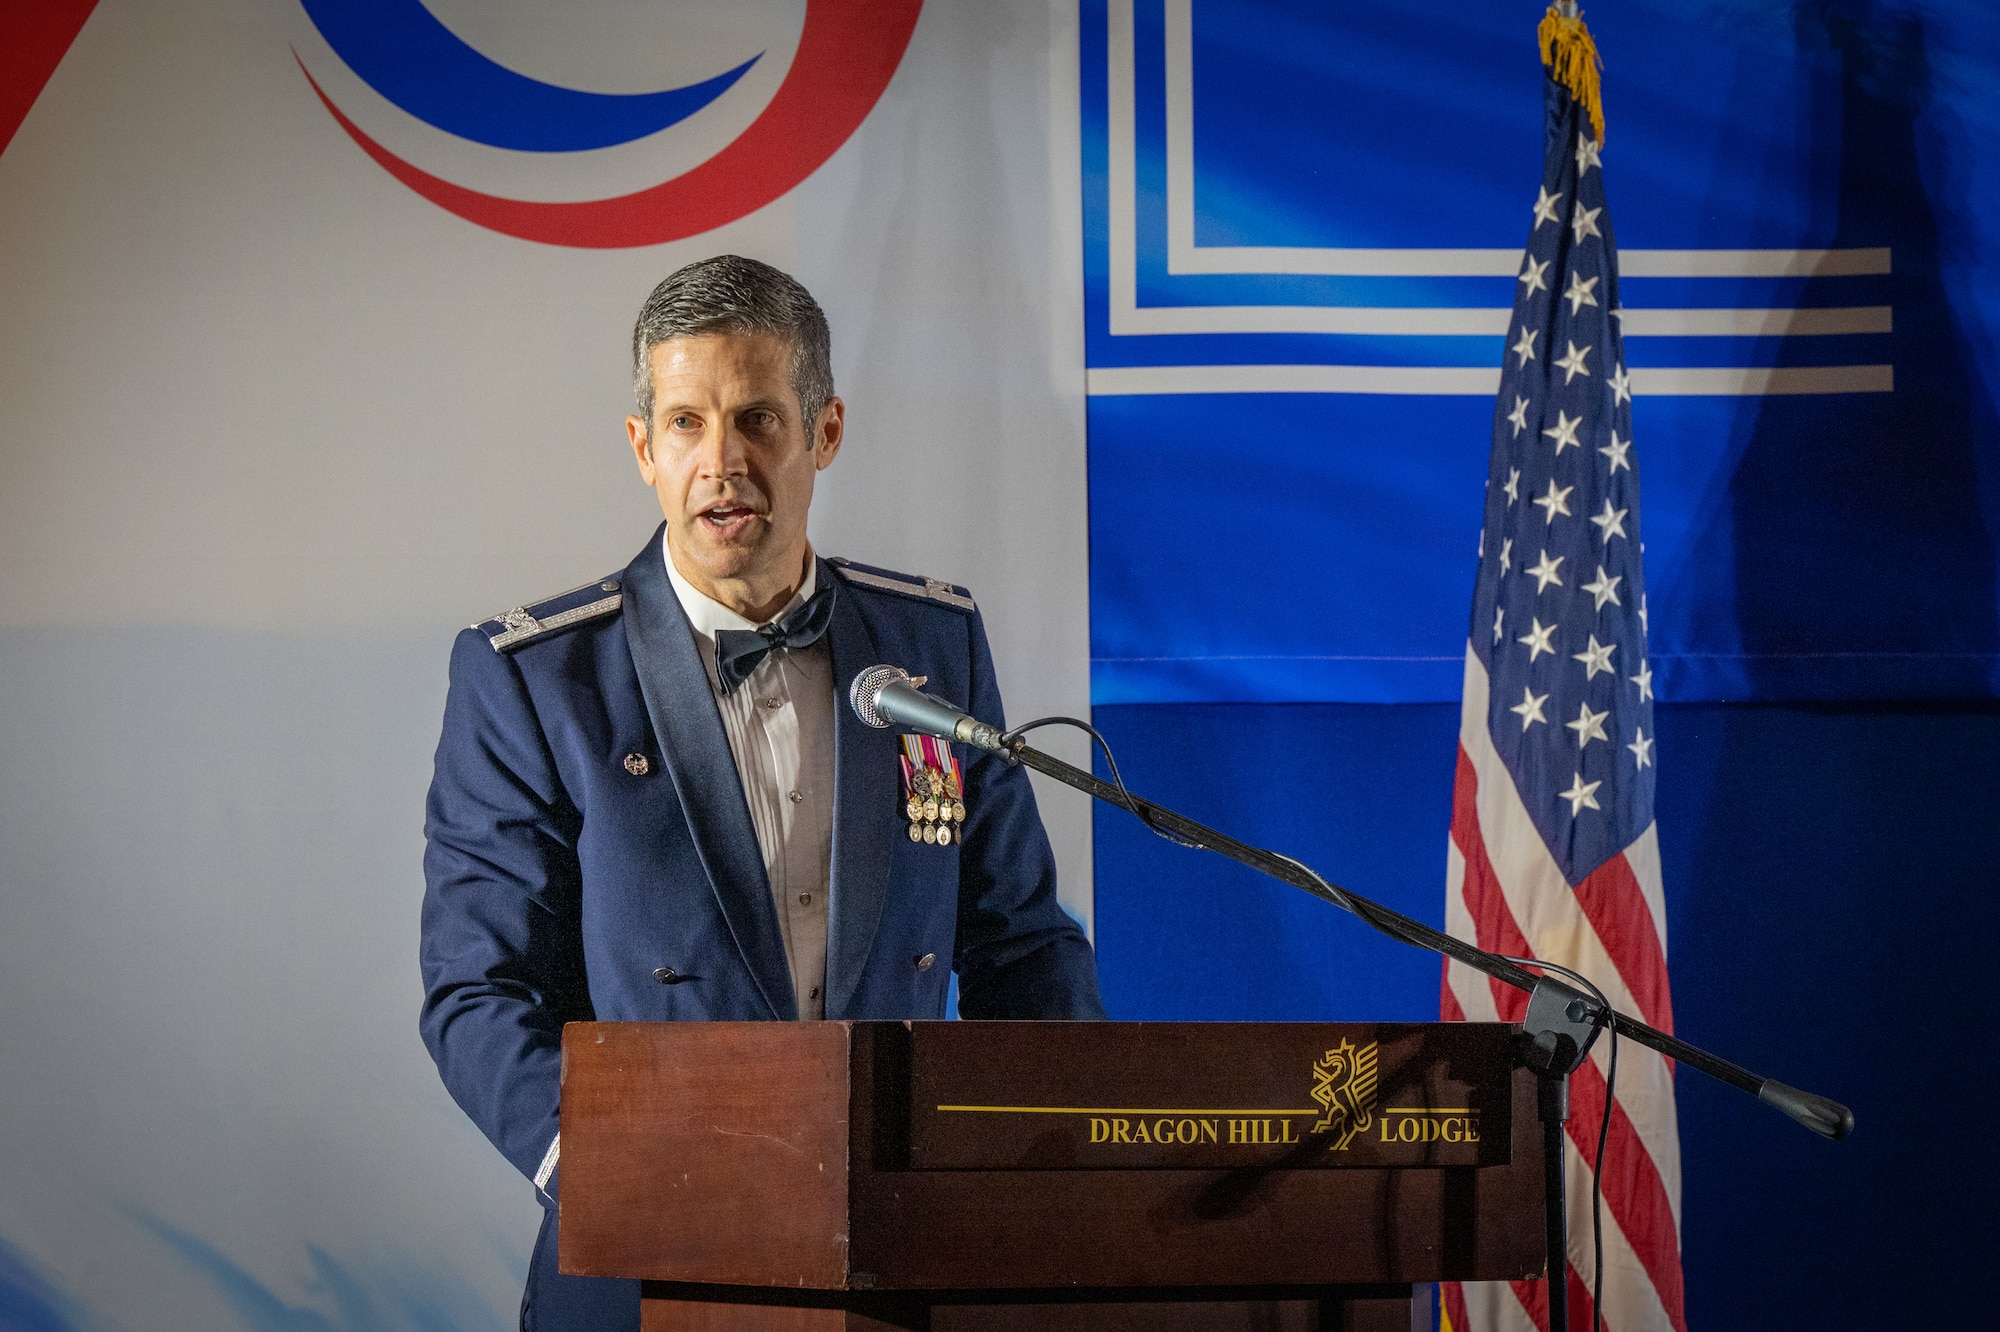 U.S. Air Force Col. William McKibban, 51st Fighter Wing commander, gives remarks at U.S. Army Garrison Yongsan, Republic of Korea, Sept. 23, 2023. The ball commemorated the 76th anniversary of the Air Force’s inception and the legacy of members that have contributed to the development of today’s force. (U.S. Air Force photo by Staff Sgt. Kelsea Caballero)